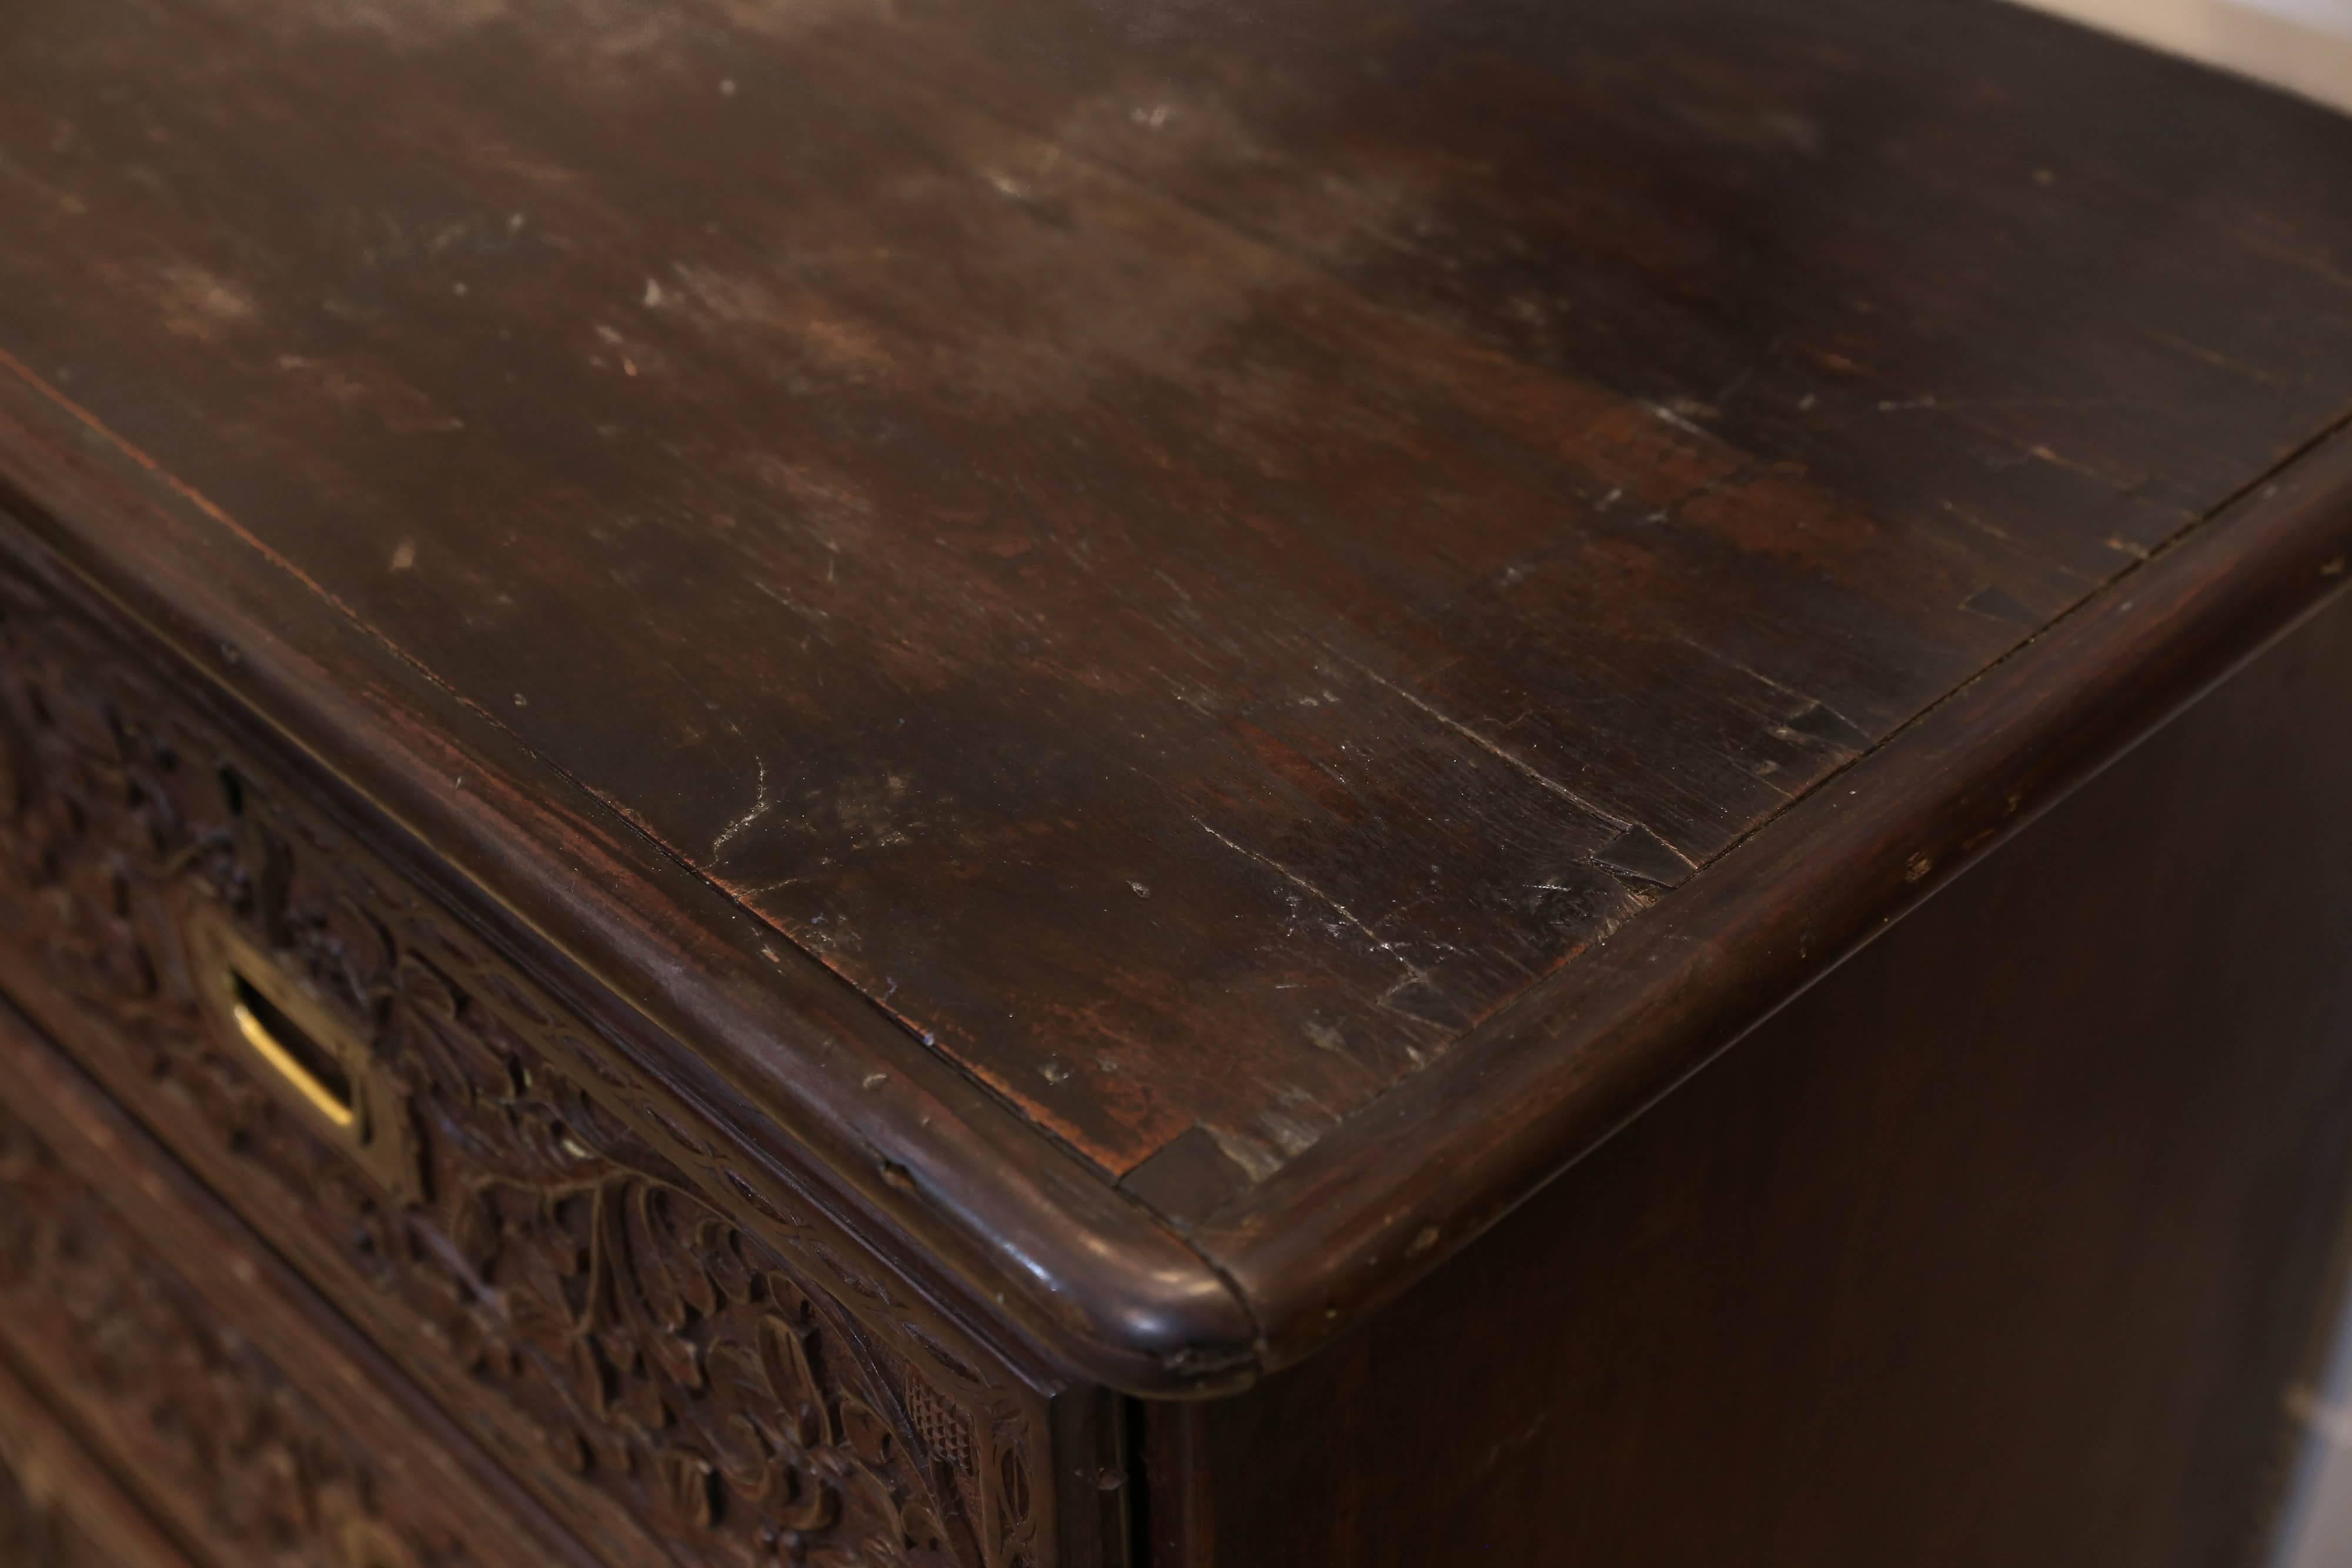 Discovered during our recent time in Europe, we fell in love with this large-scale exquisitely carved English Edwardian chest of drawers made from palisander rosewood with brass pull detail. Dates to the early to mid-1800s and is considered a